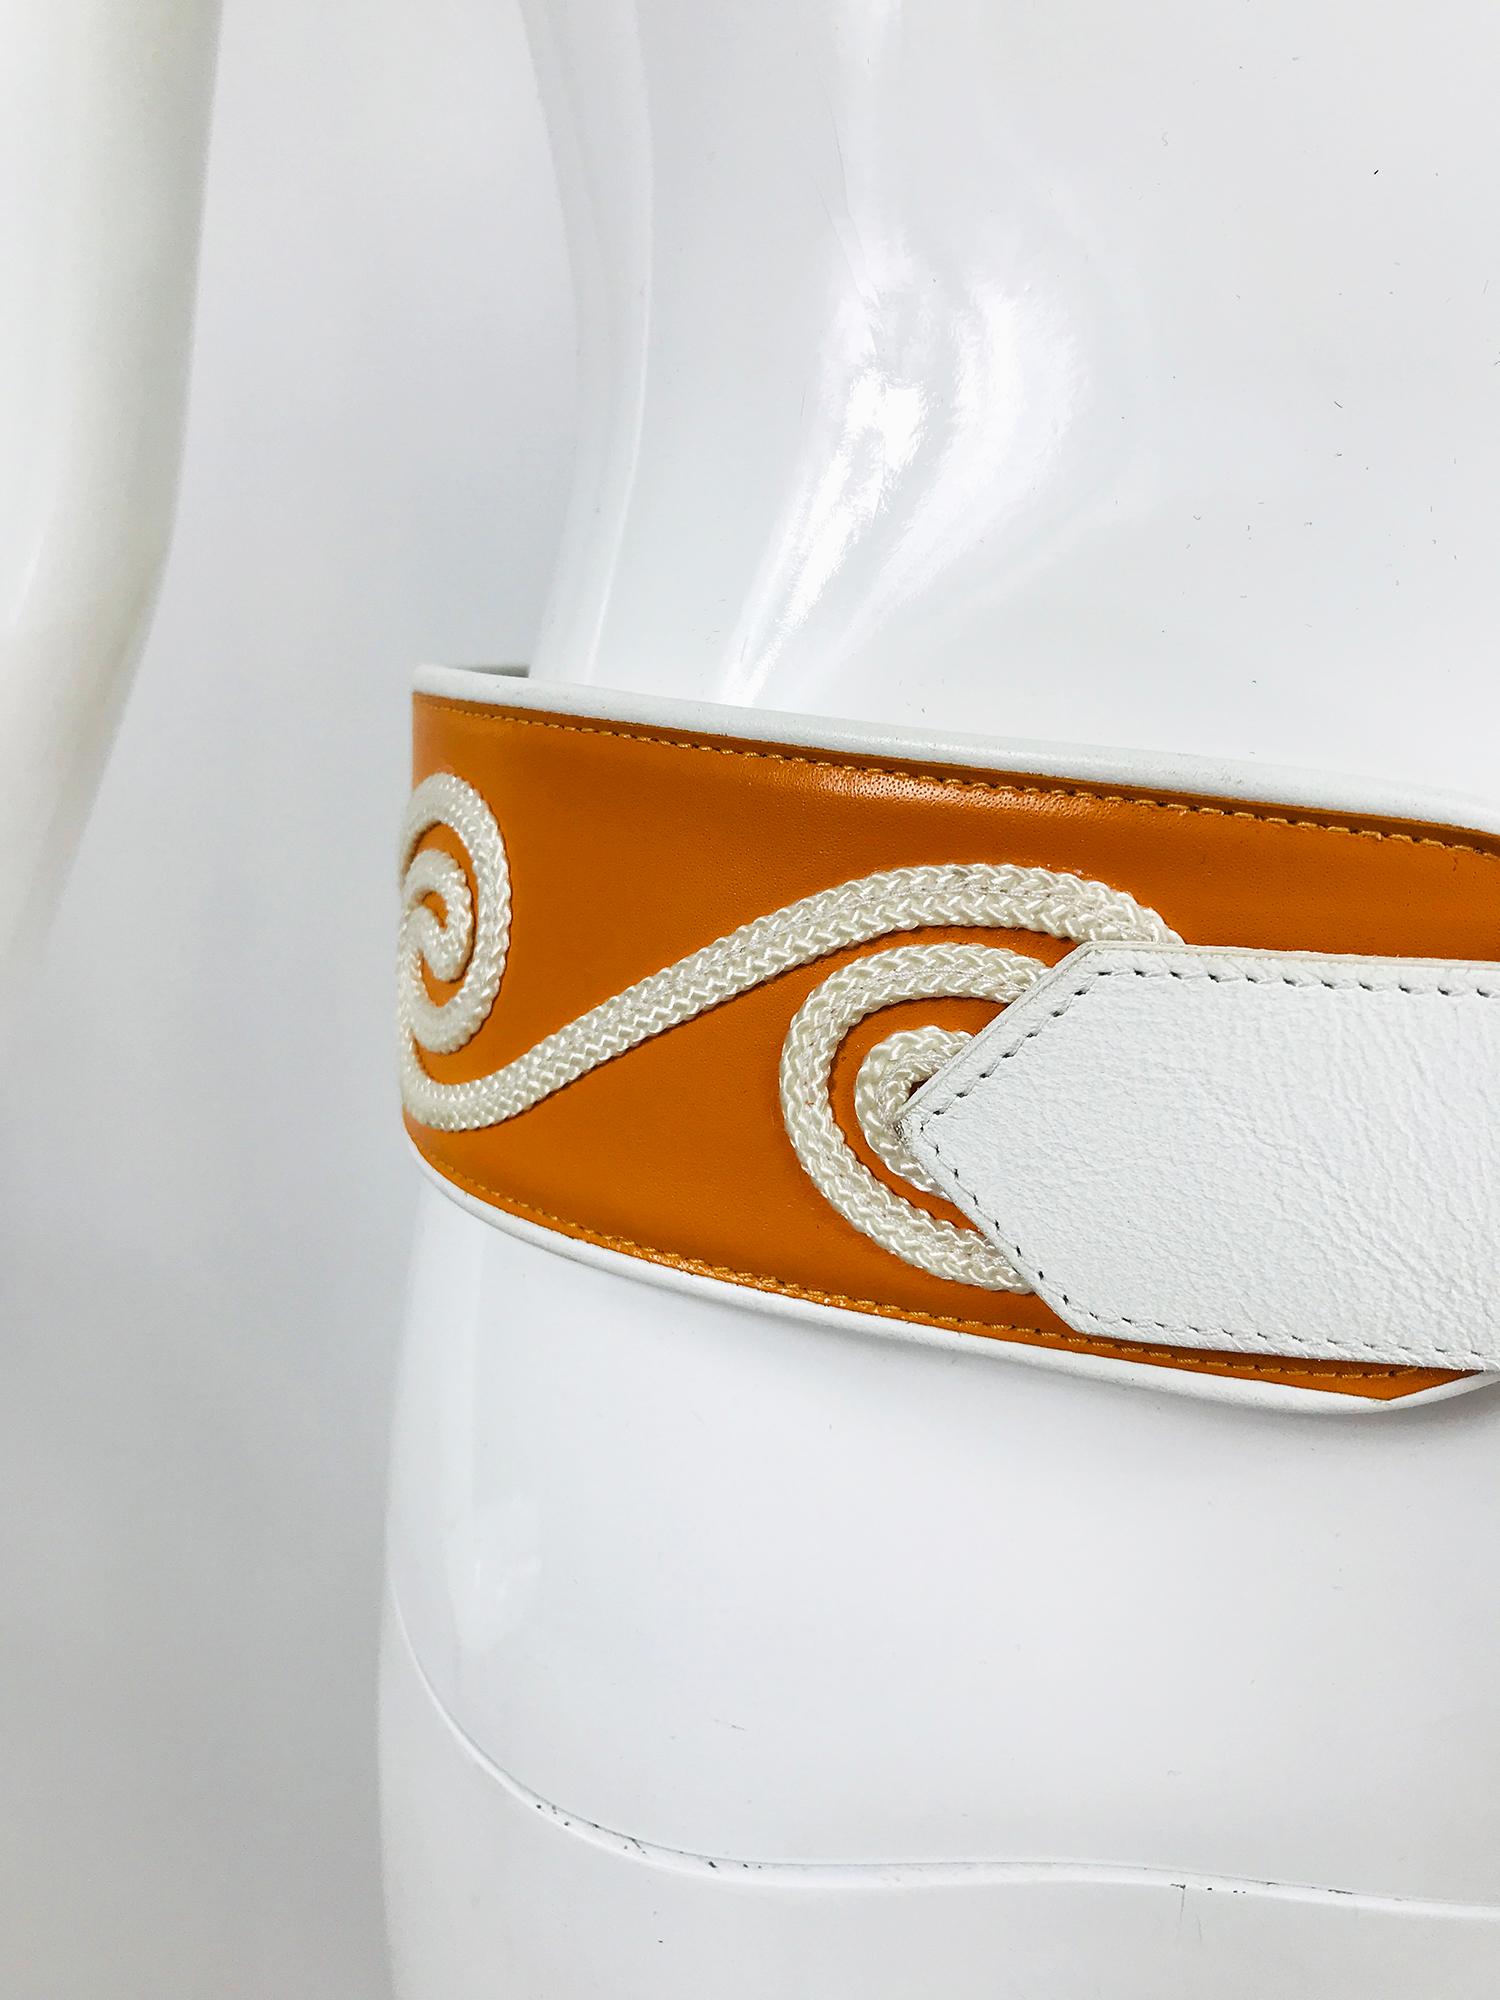 Christian Dior white & golden yellow cord applique wide leather belt marked medium-large. From the 1990s a beautiful wide leather belt in white leather with golden yellow, the center of the belt is appliqued with white cord. The belt is trimmed in